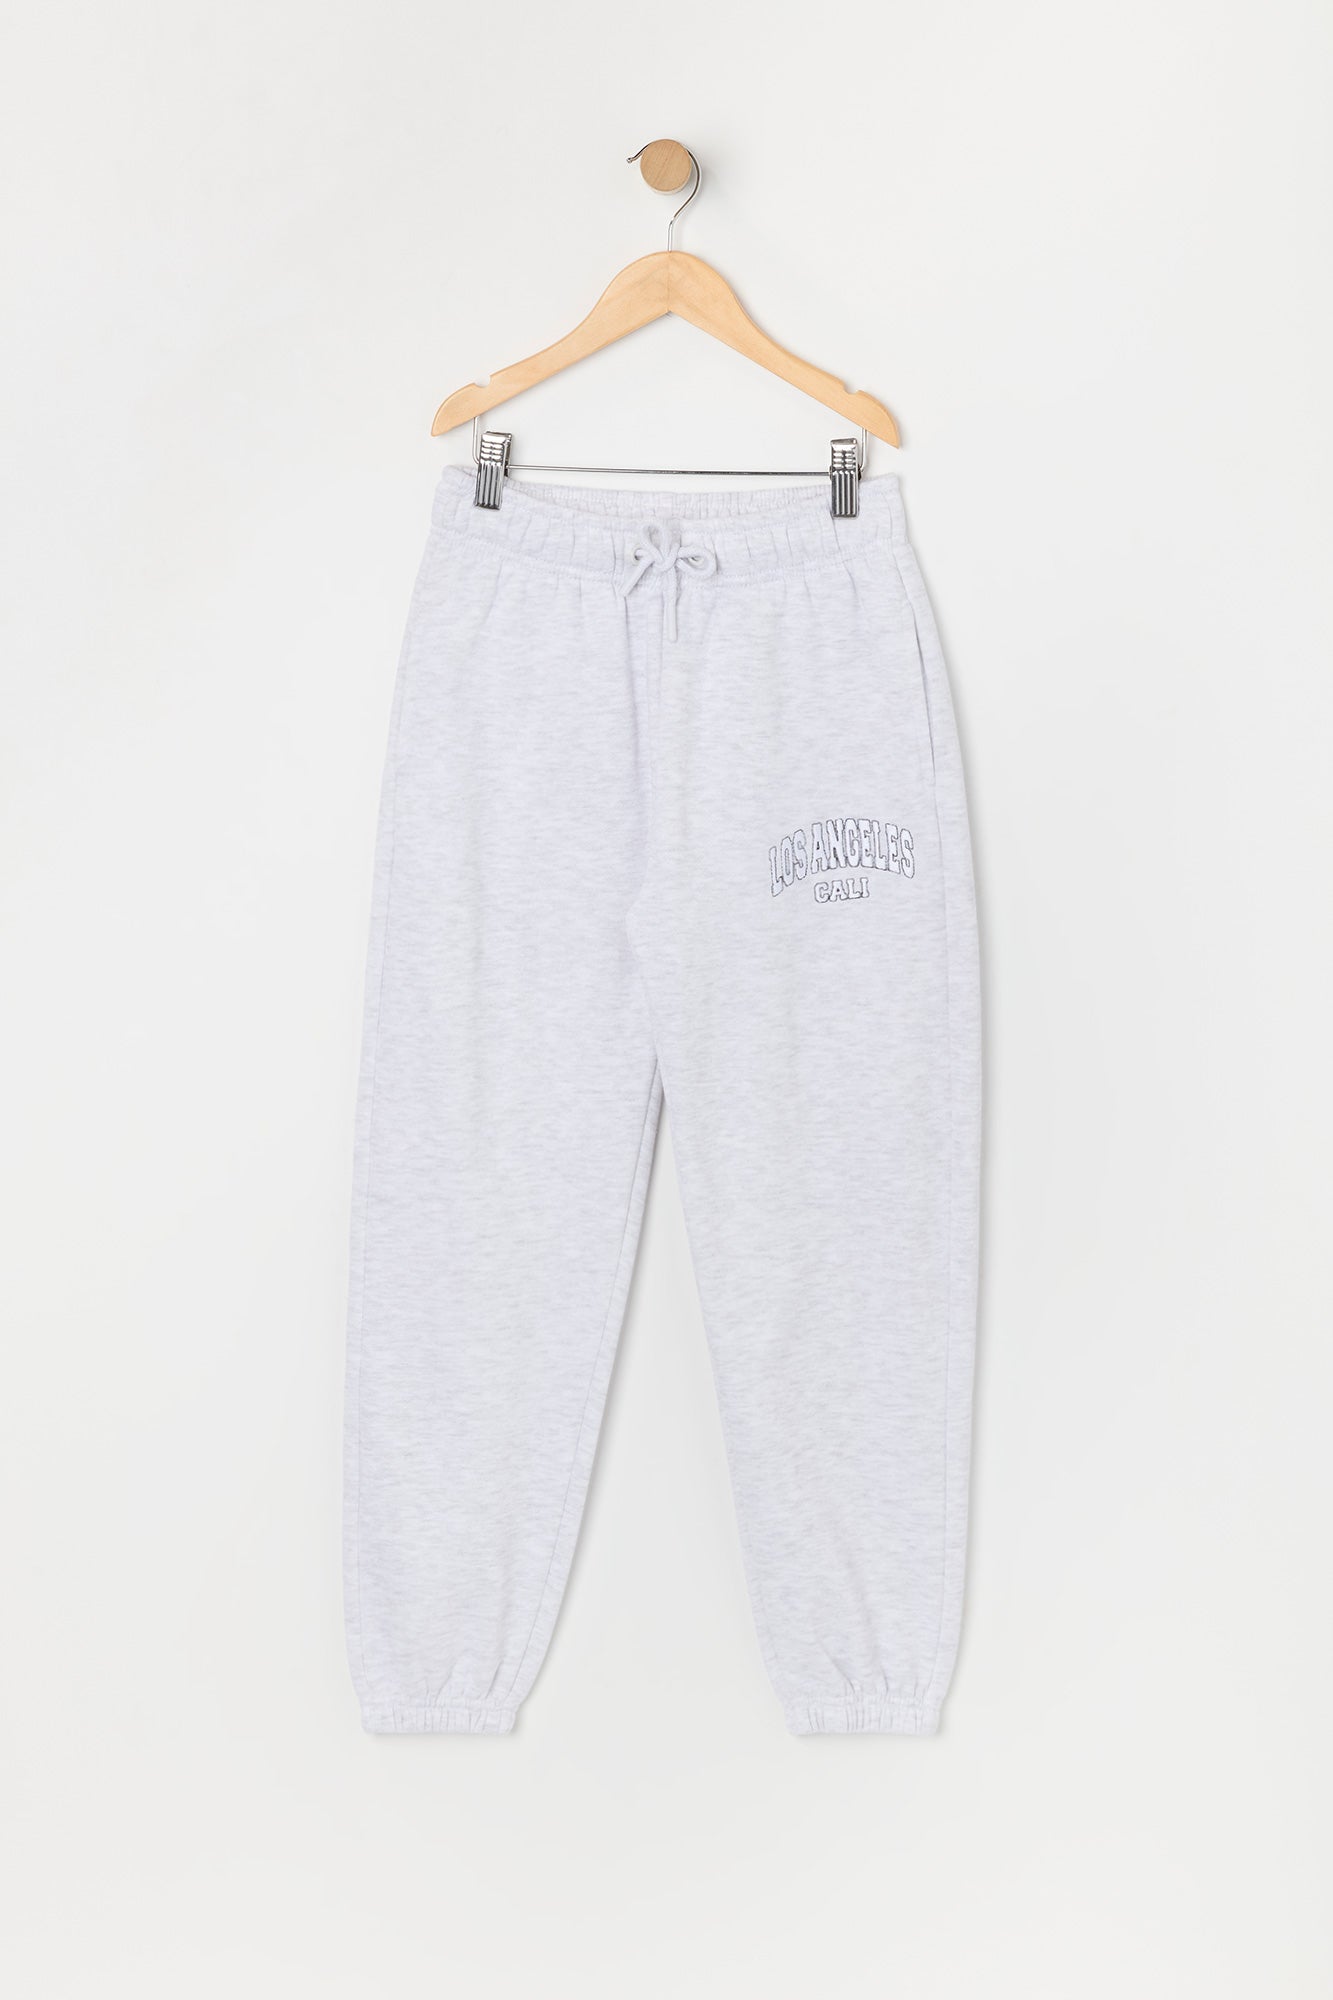 Girls Los Angeles Embroidered Fleece Jogger